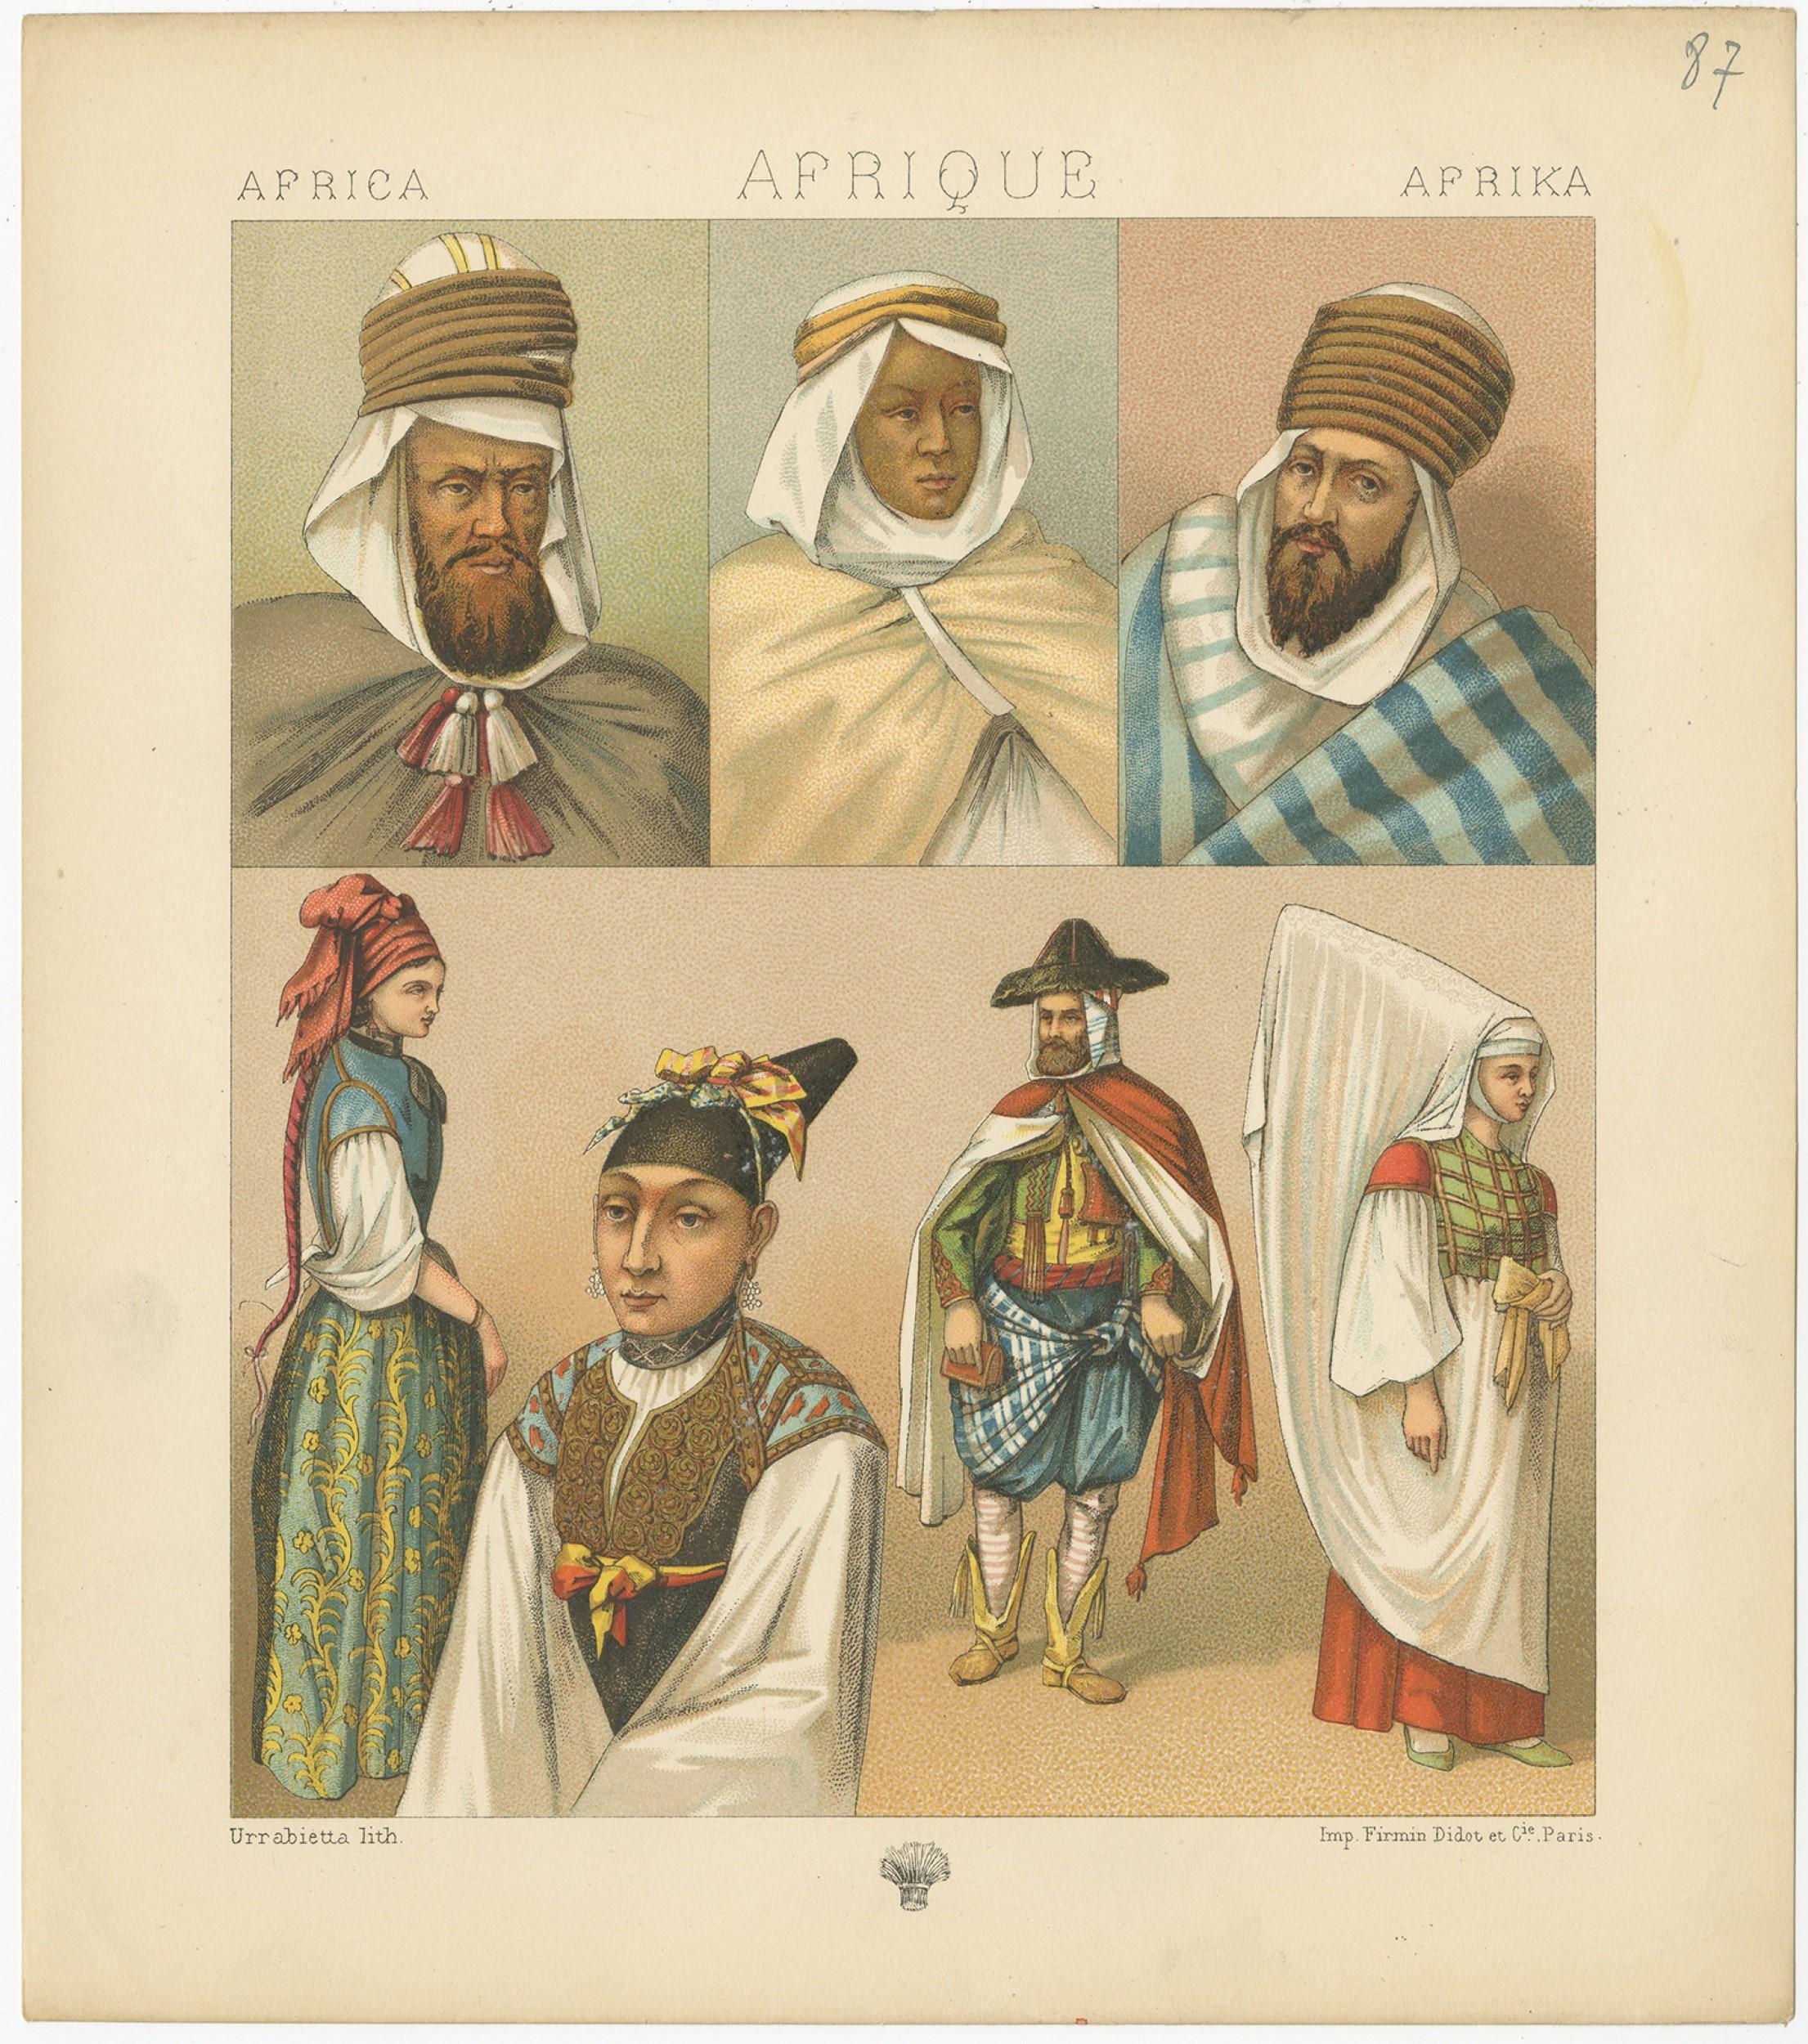 Antique print titled 'Africa - Afrique - Afrika'. Chromolithograph of African Costumes. This print originates from 'Le Costume Historique' by M.A. Racinet. Published, circa 1880.